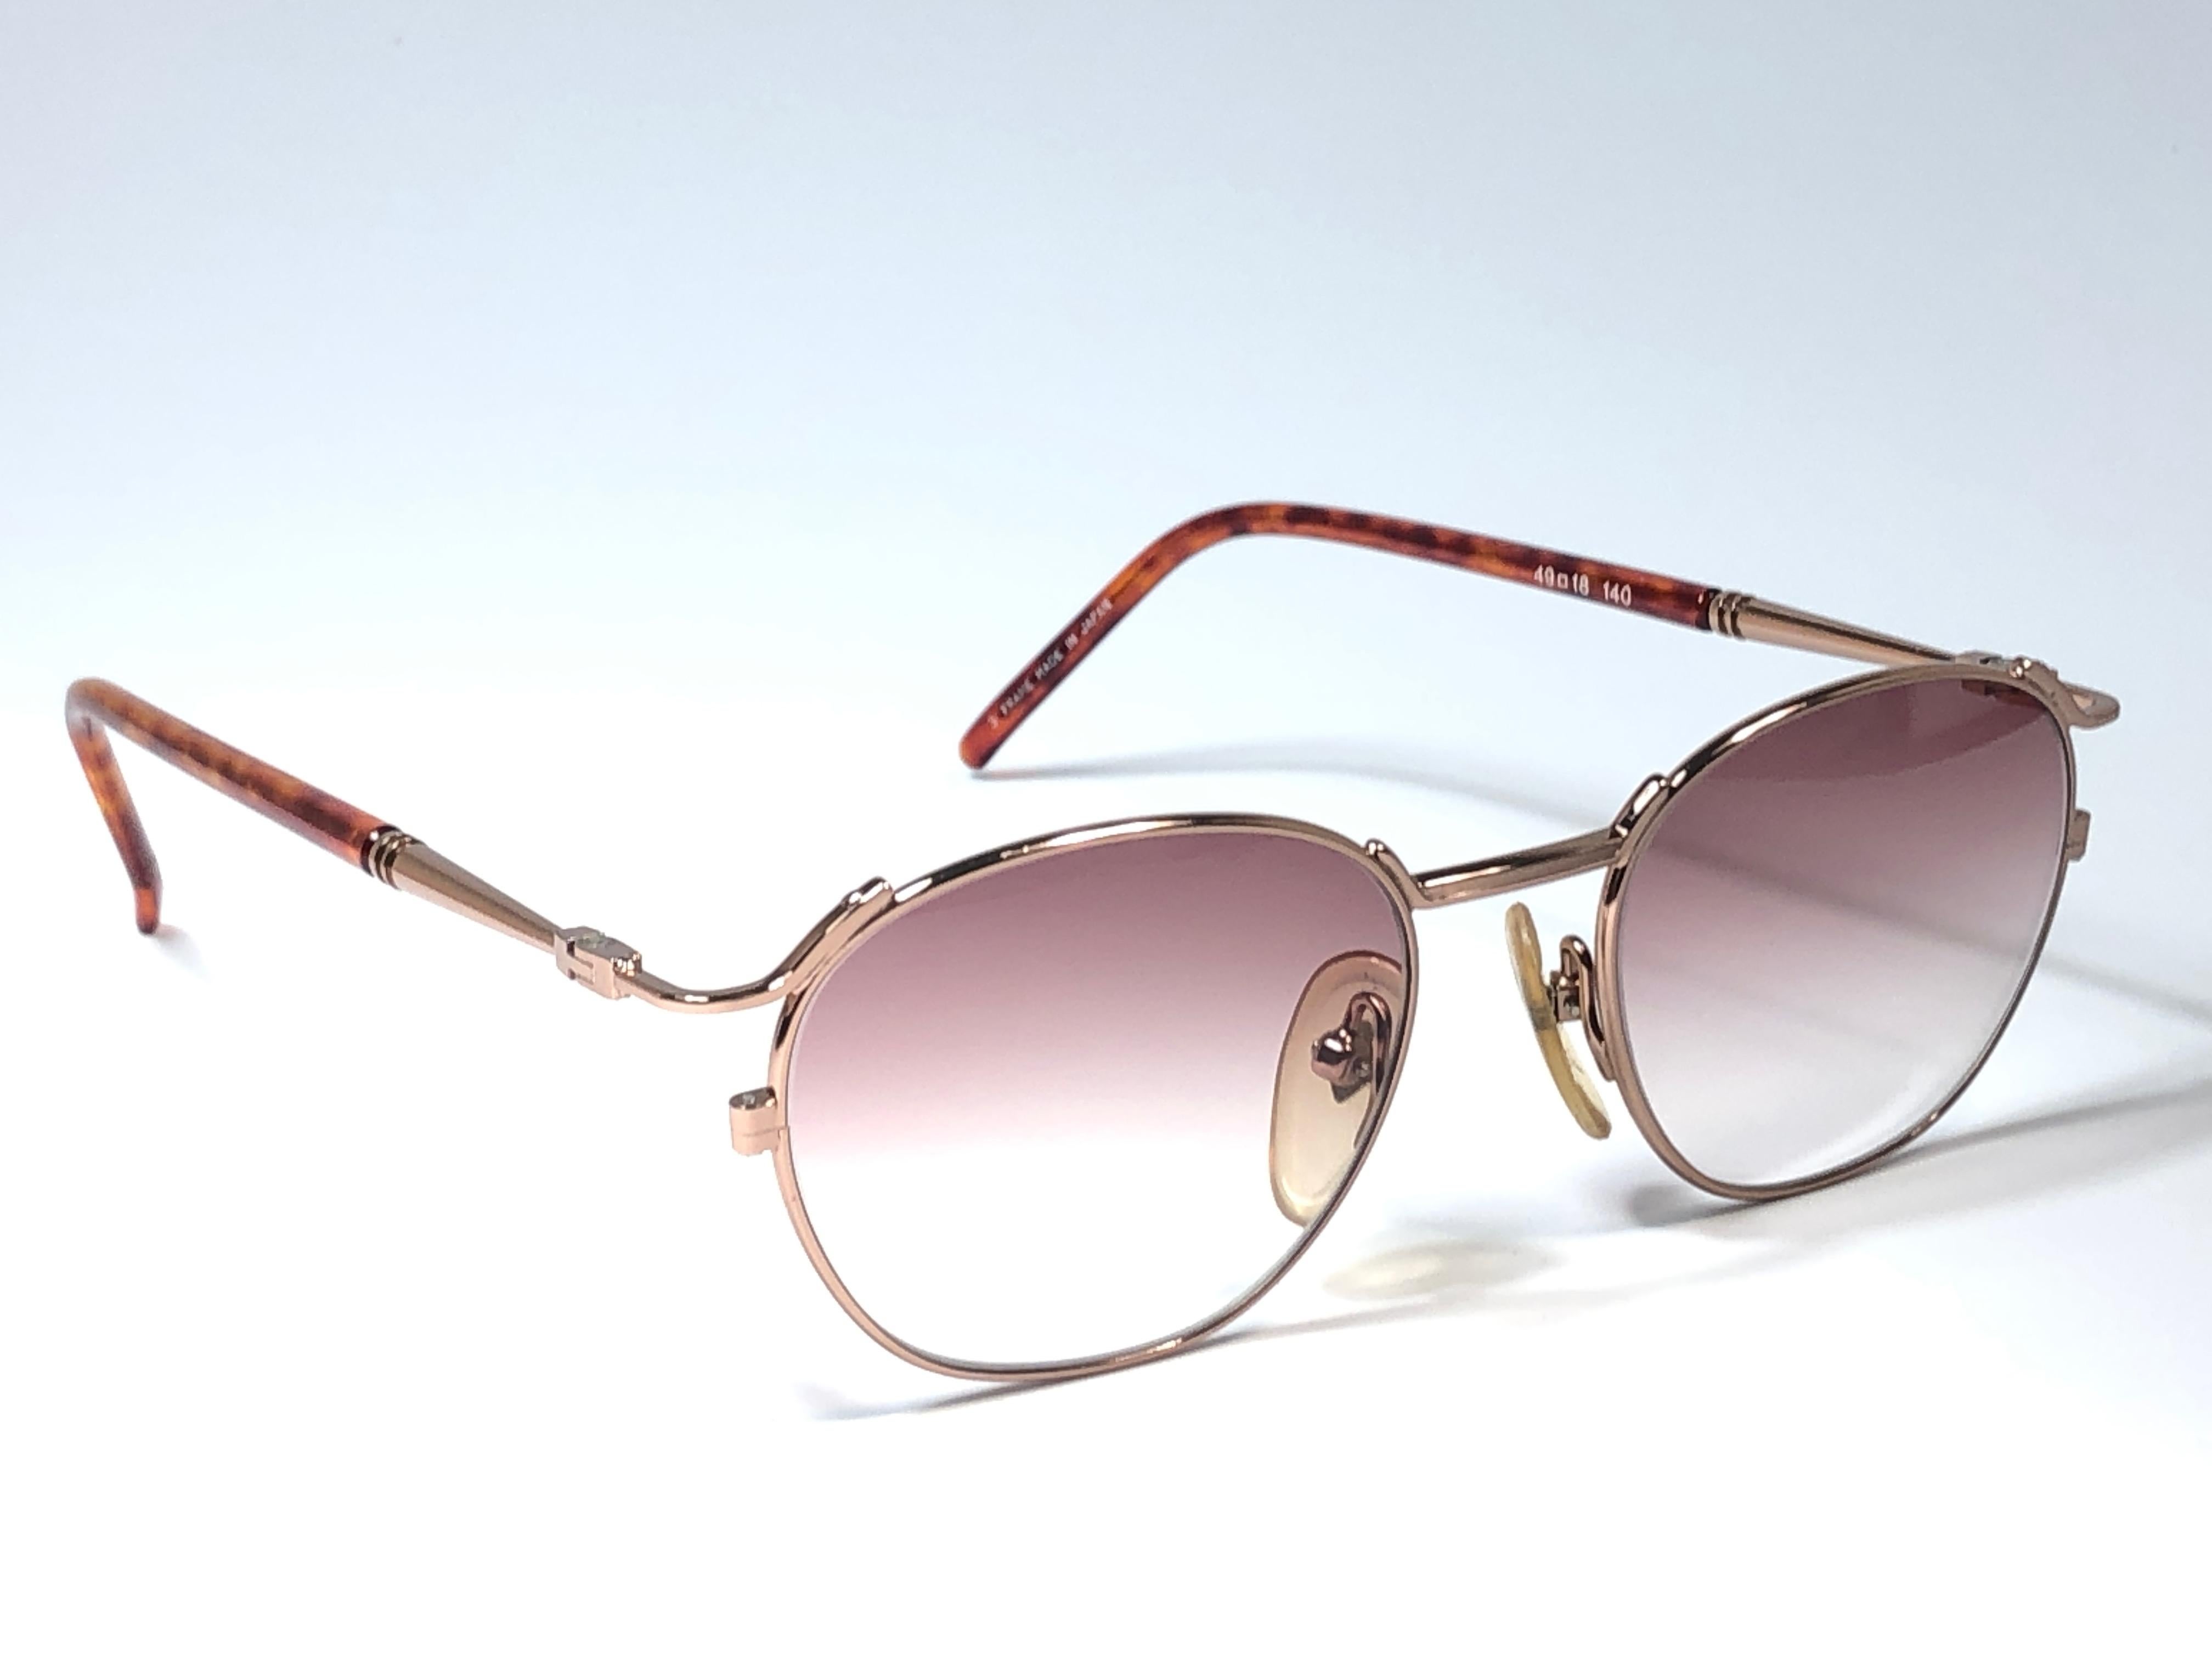 New Jean Paul Gaultier medium rose gold frame. 
Spotless light gradient rose lenses that complete a ready to wear JPG look.

Amazing design with strong yet intricate details.
Design and produced in the 1990's.
New, never worn or displayed.
A true